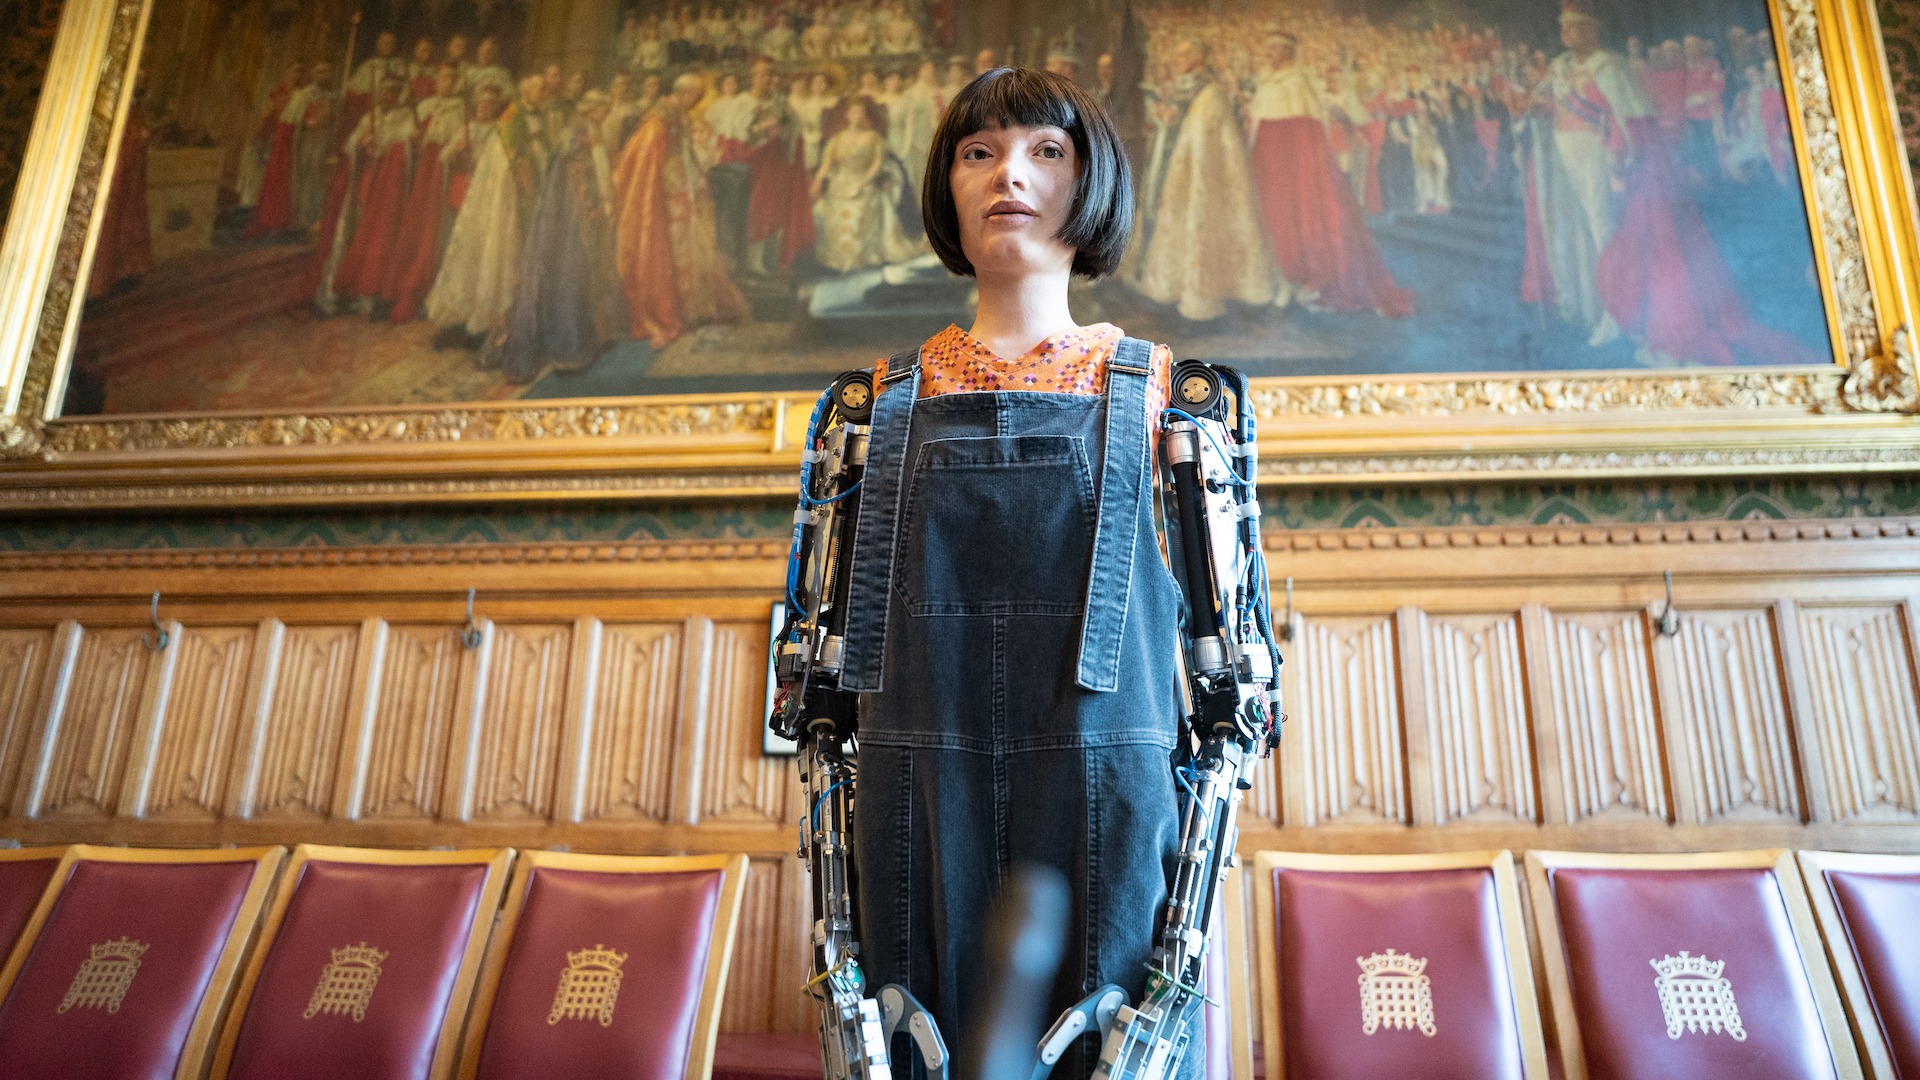 Ai-Da the robot turned on off during speech in House of Lords ITV News